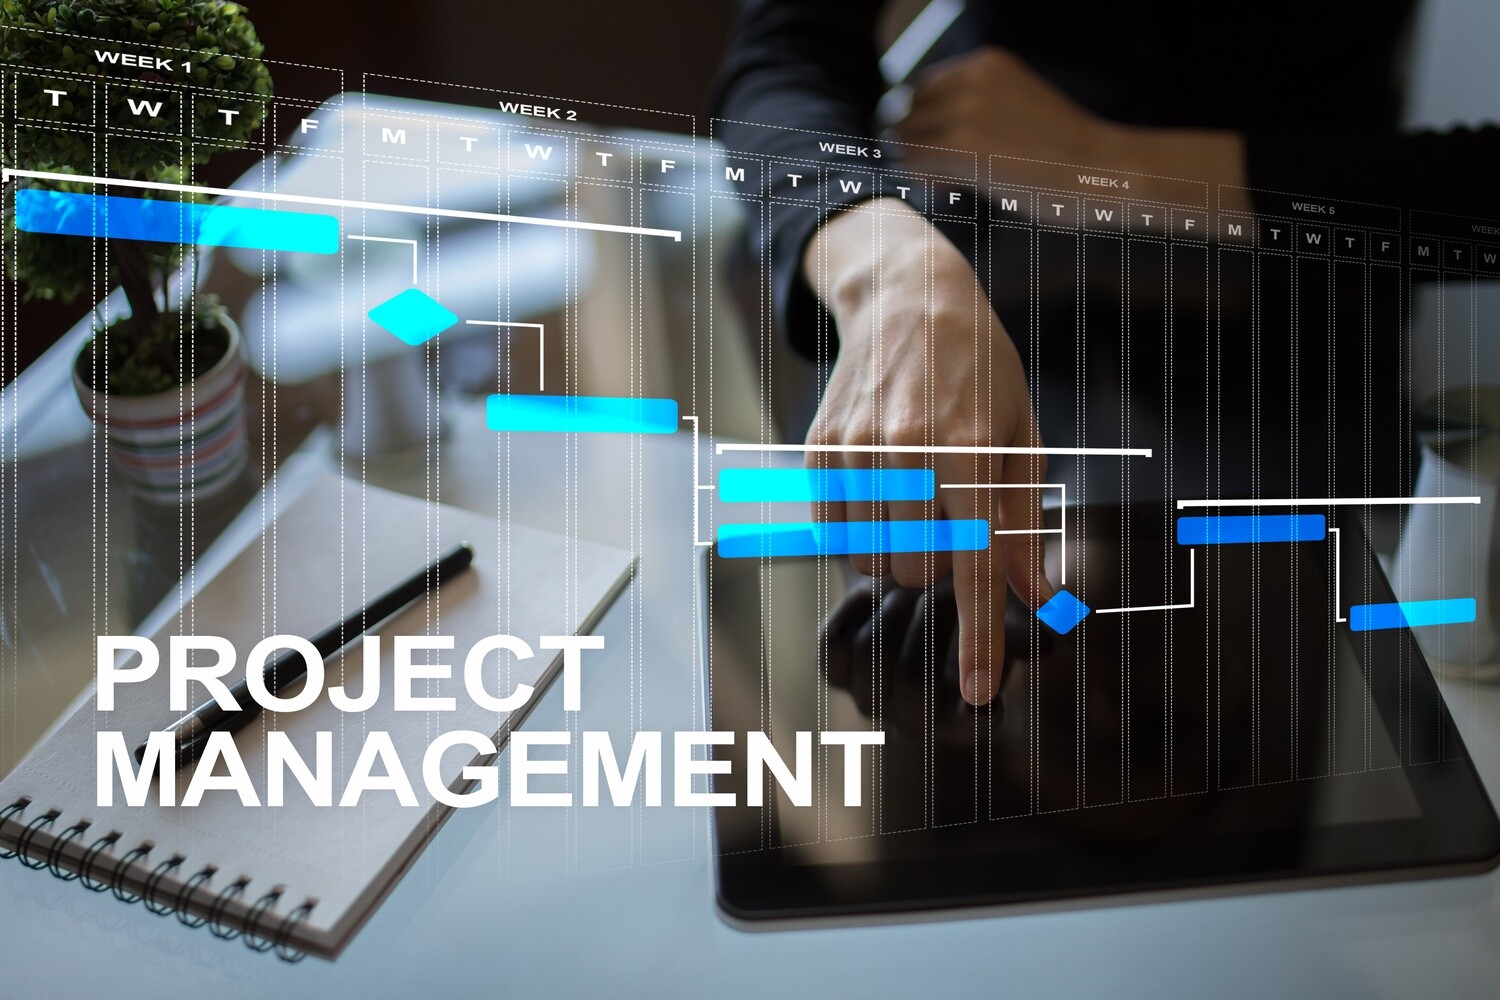 Project Management Overview – 1 Day, 7 PDUs